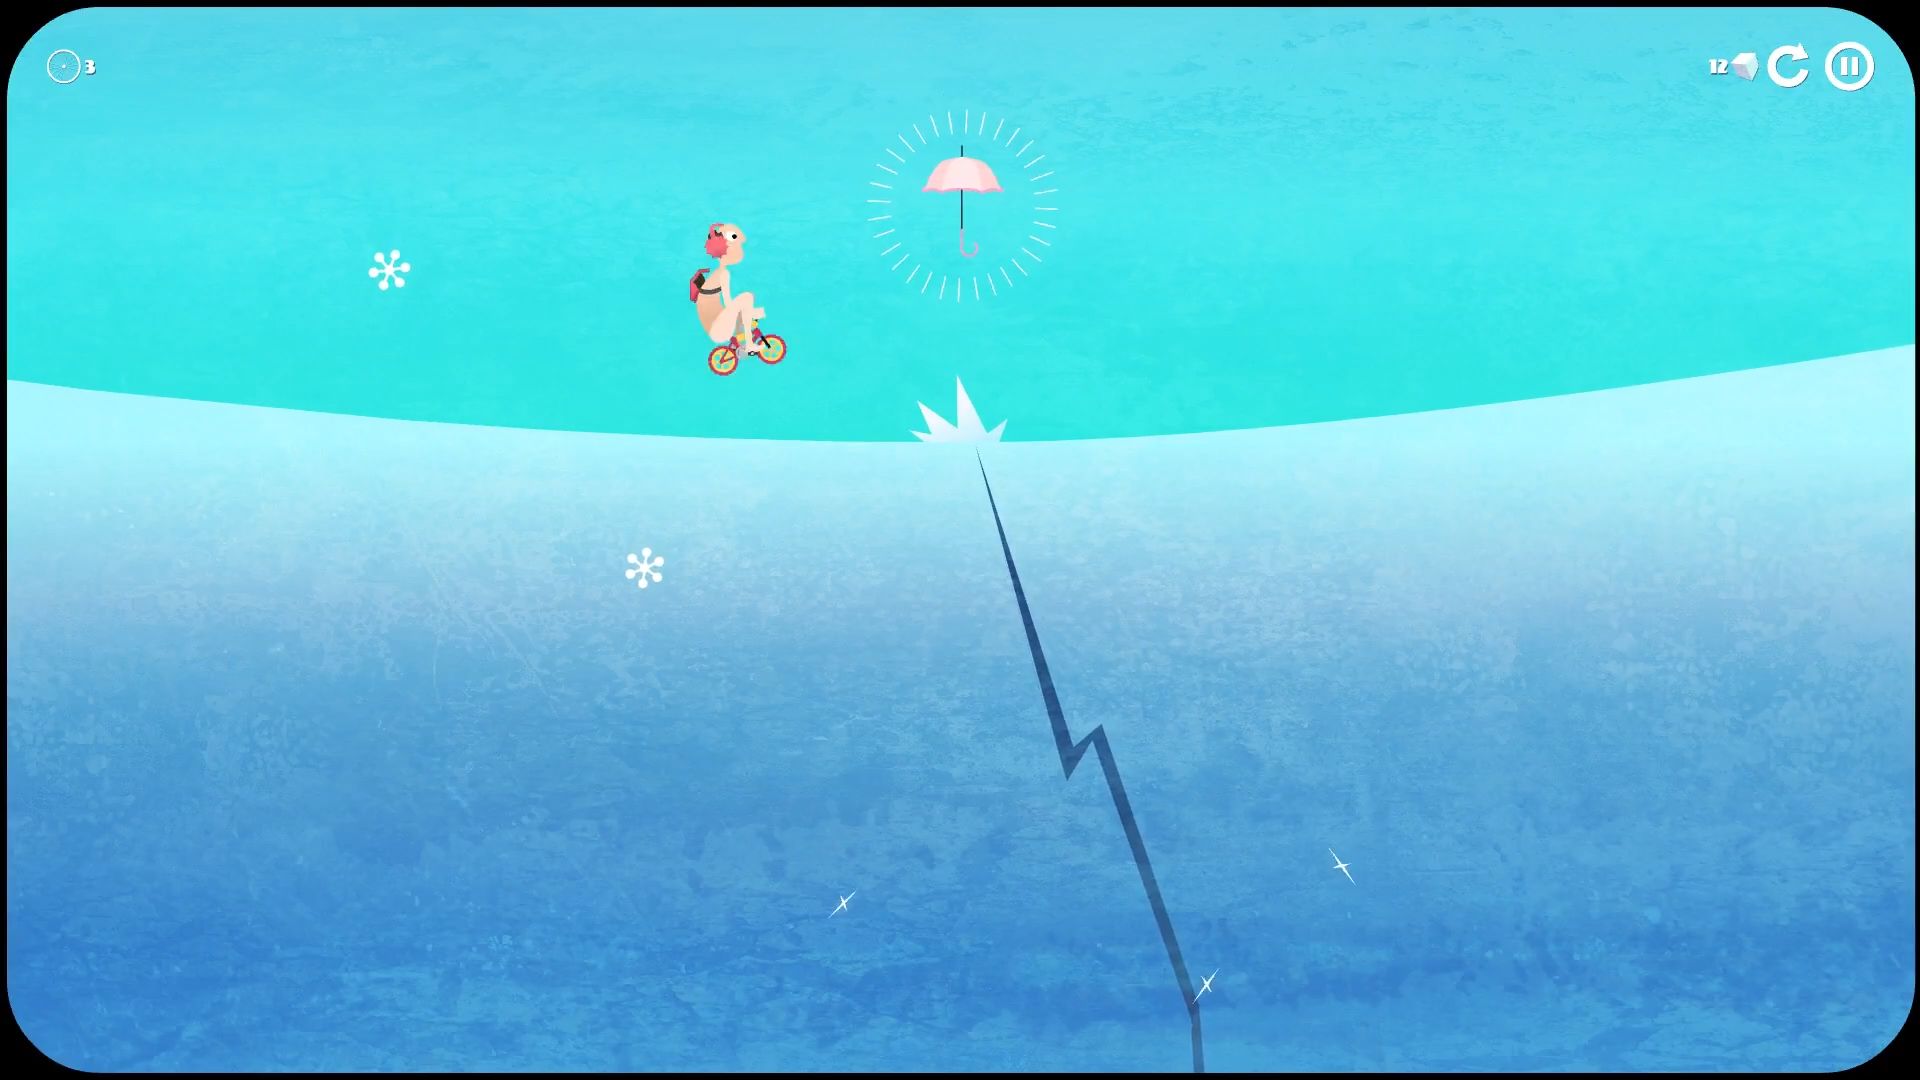 Icycle: On Thin Ice for Android